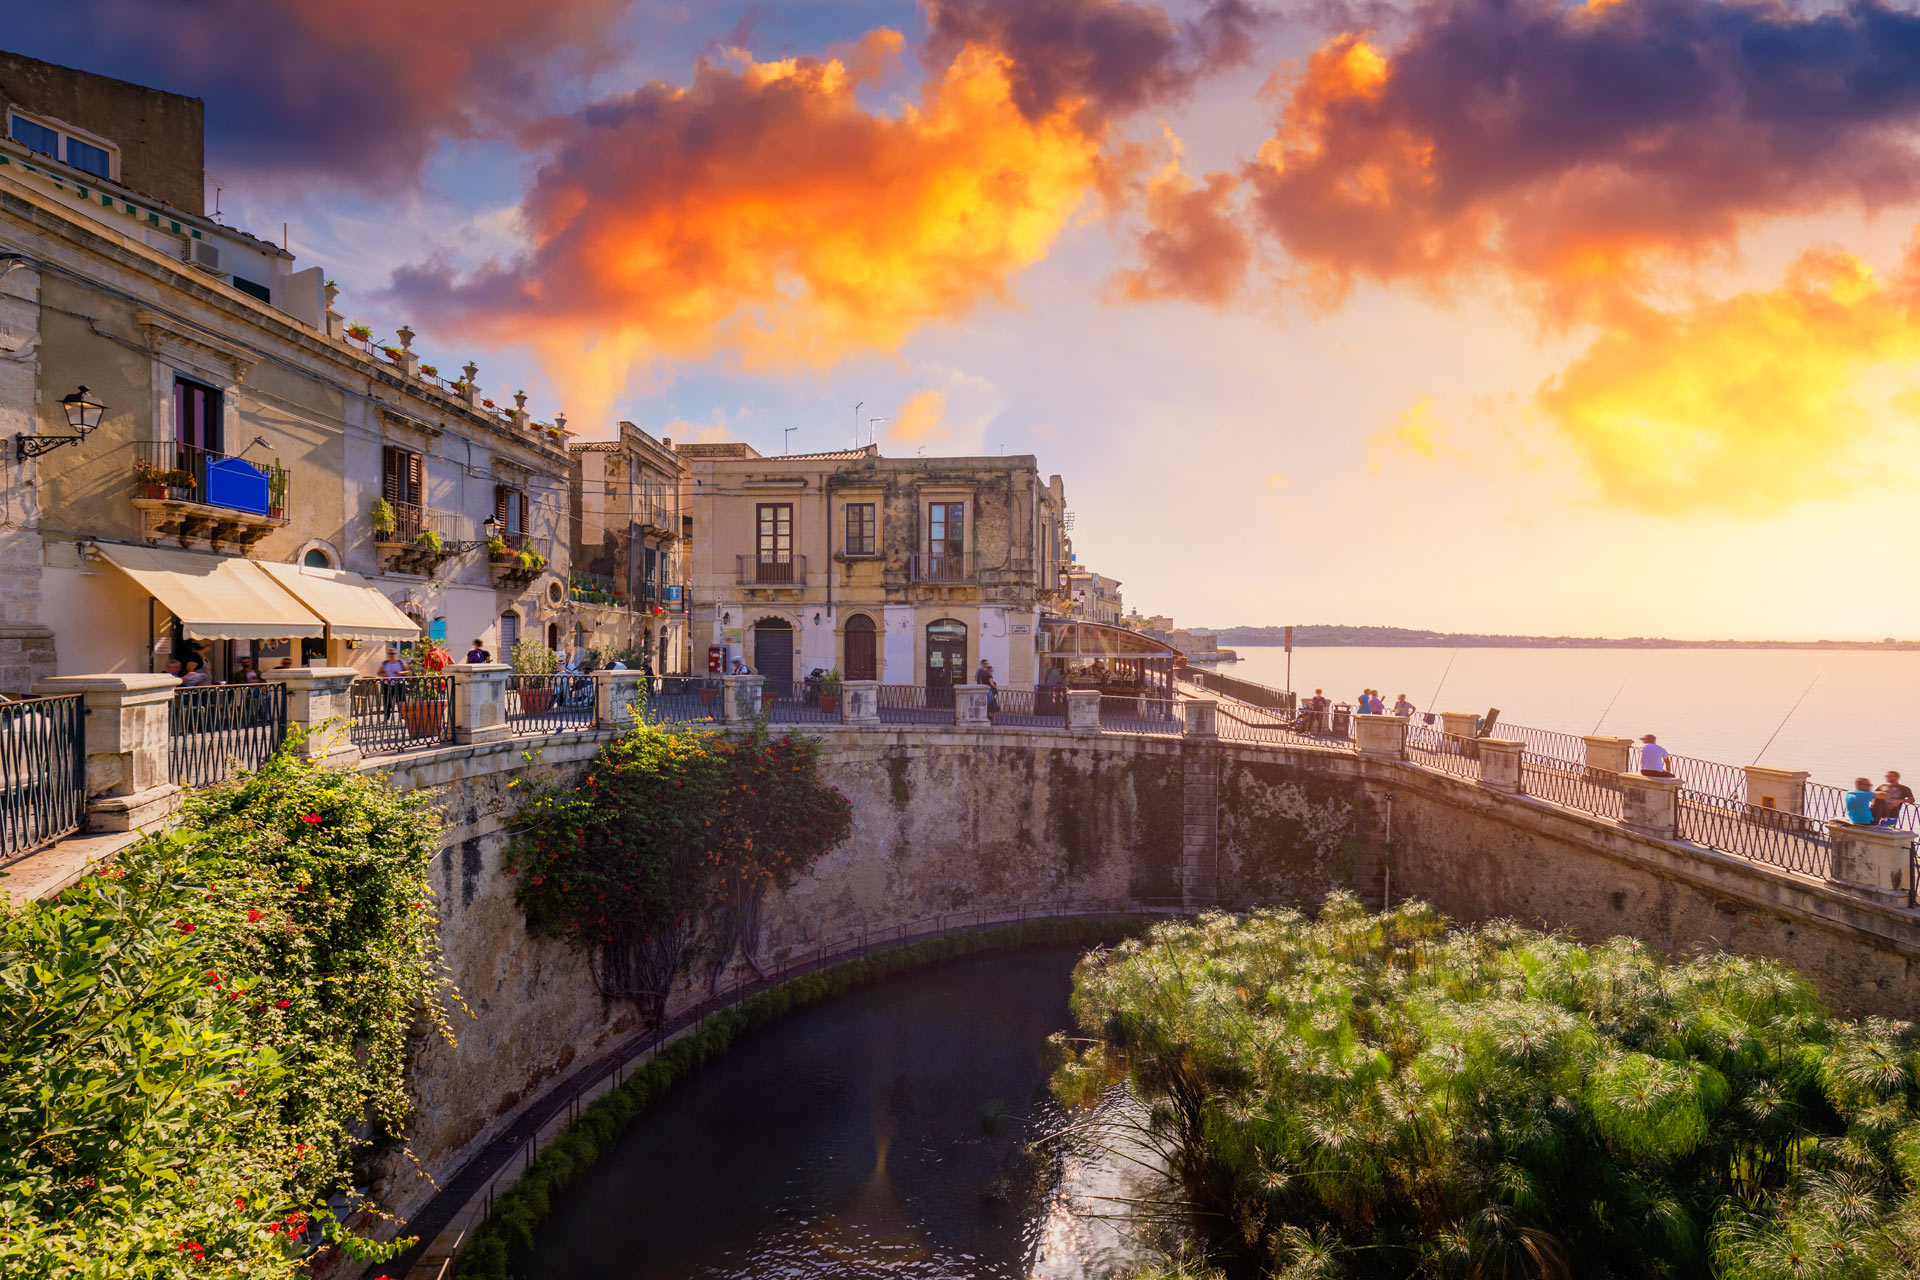 Sunset and town in Sicily, Italy